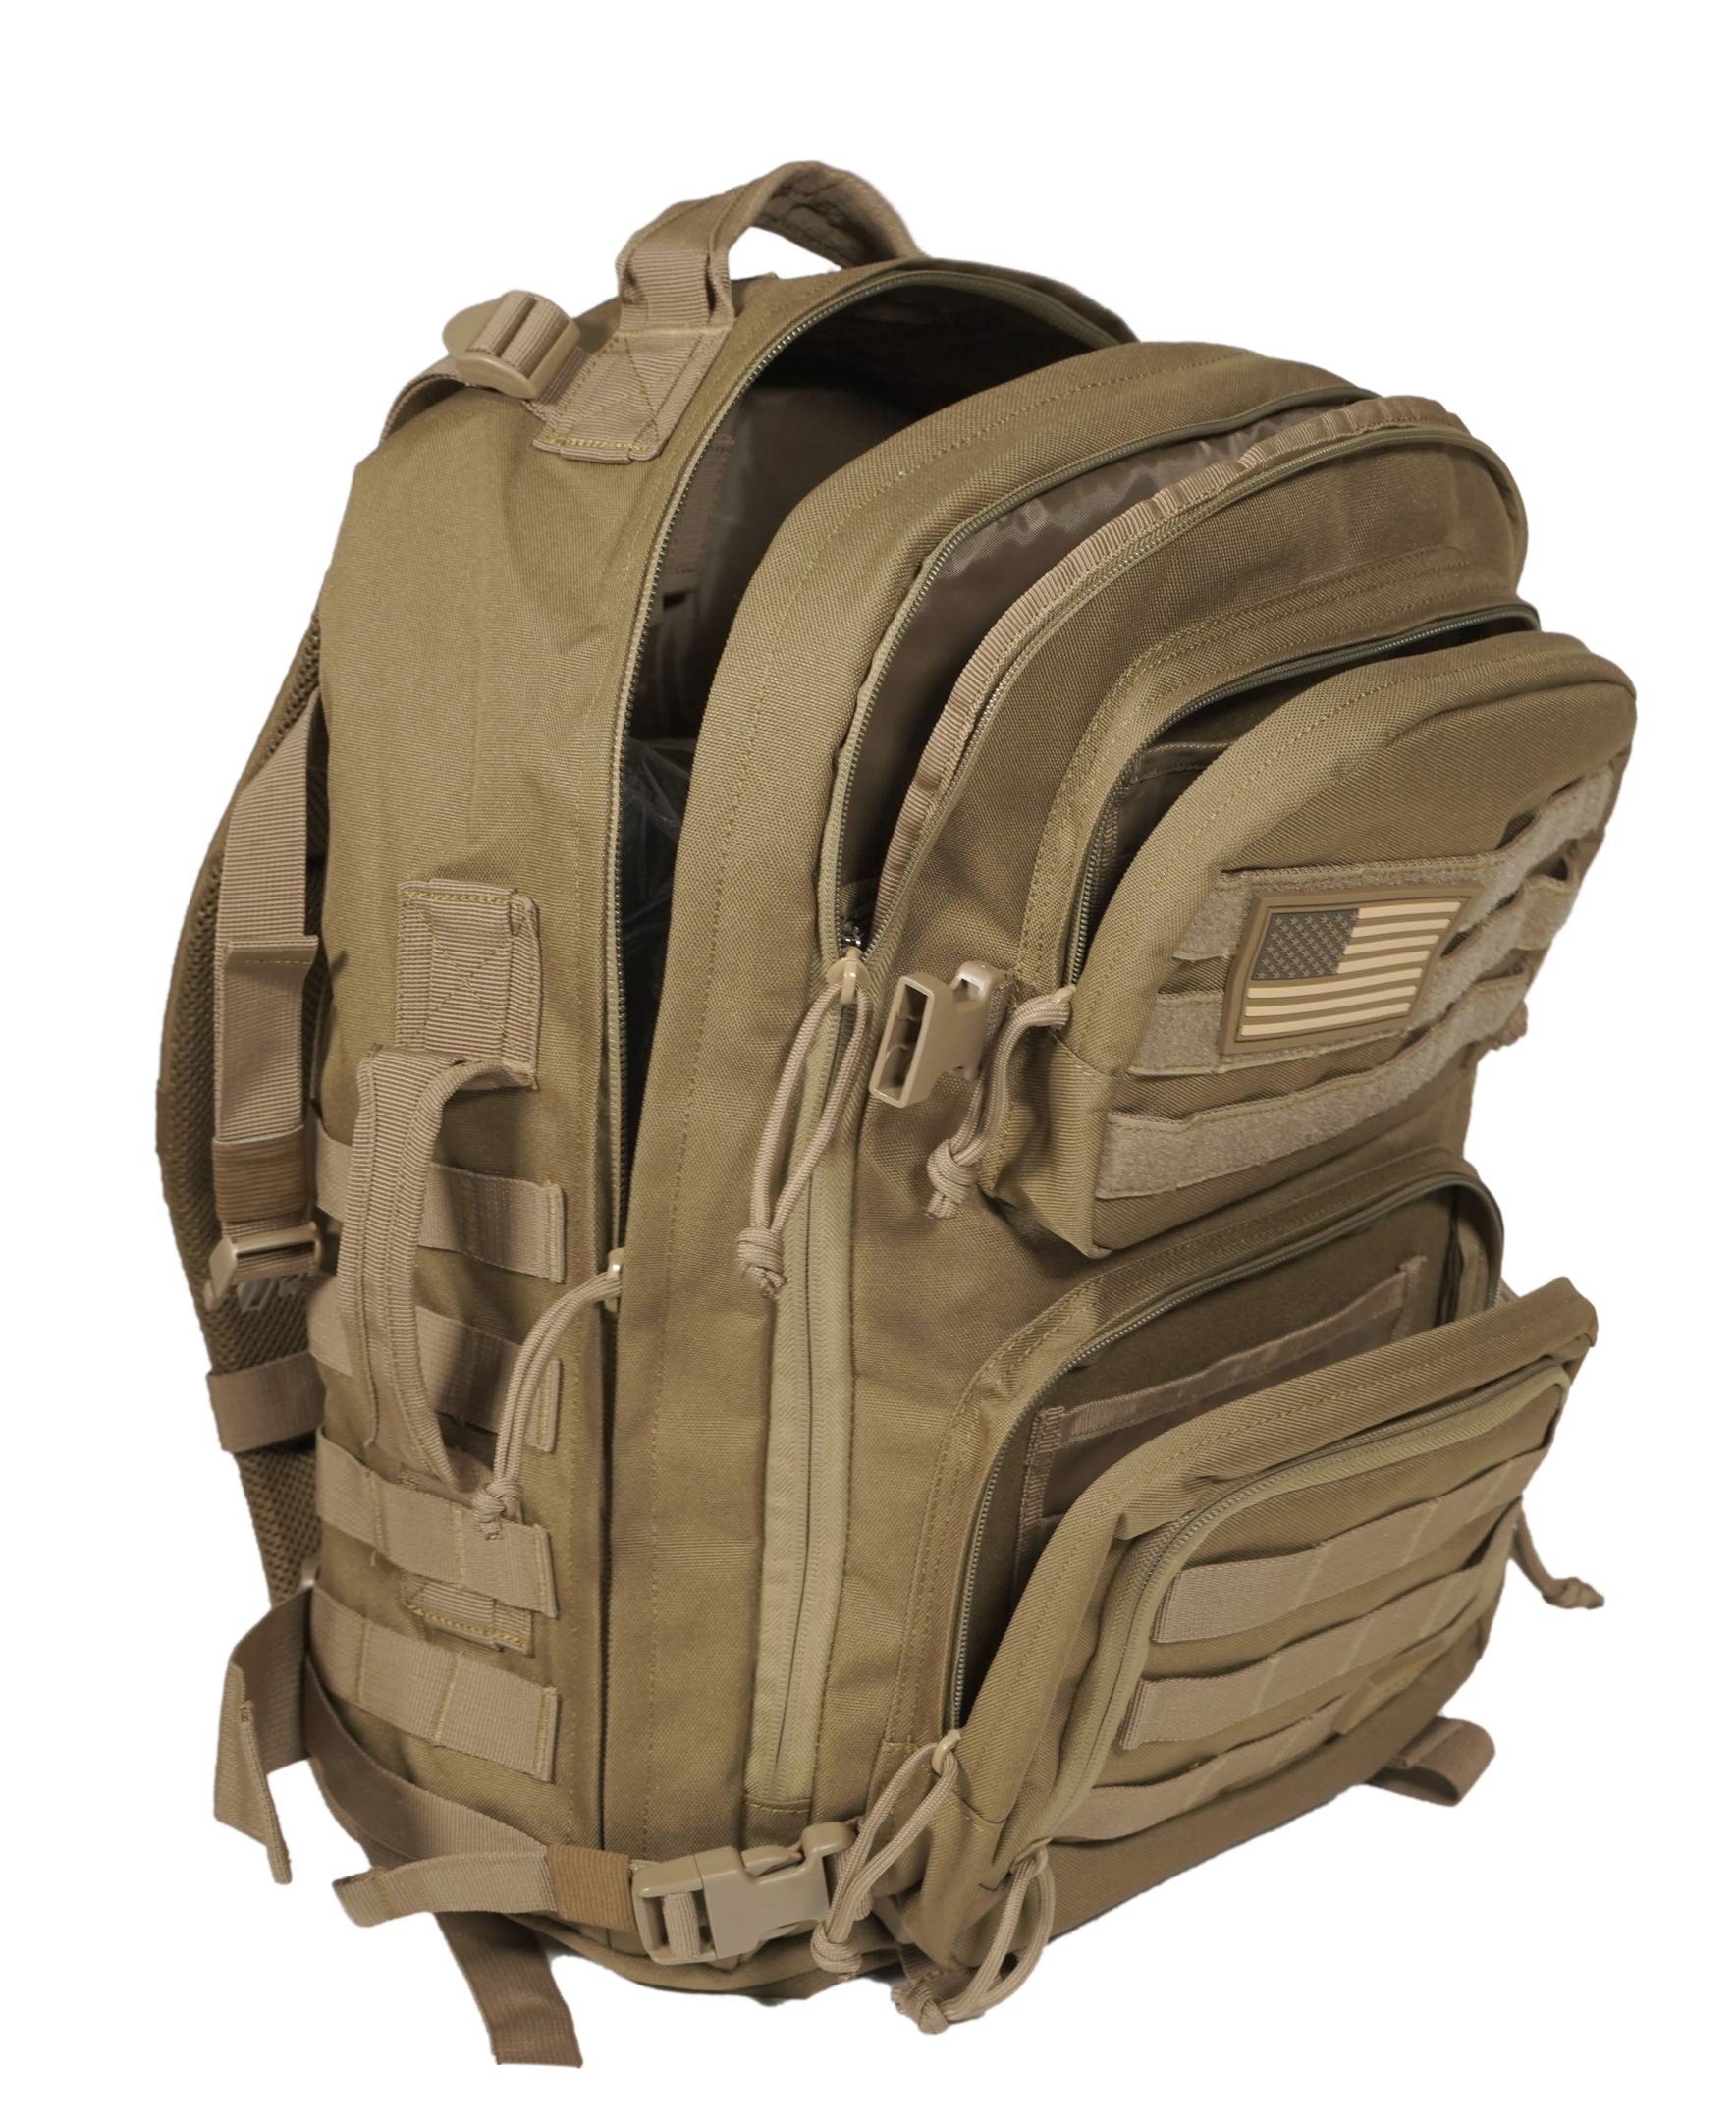 Rockland Military Tactical Laptop Backpack, Tan, Large